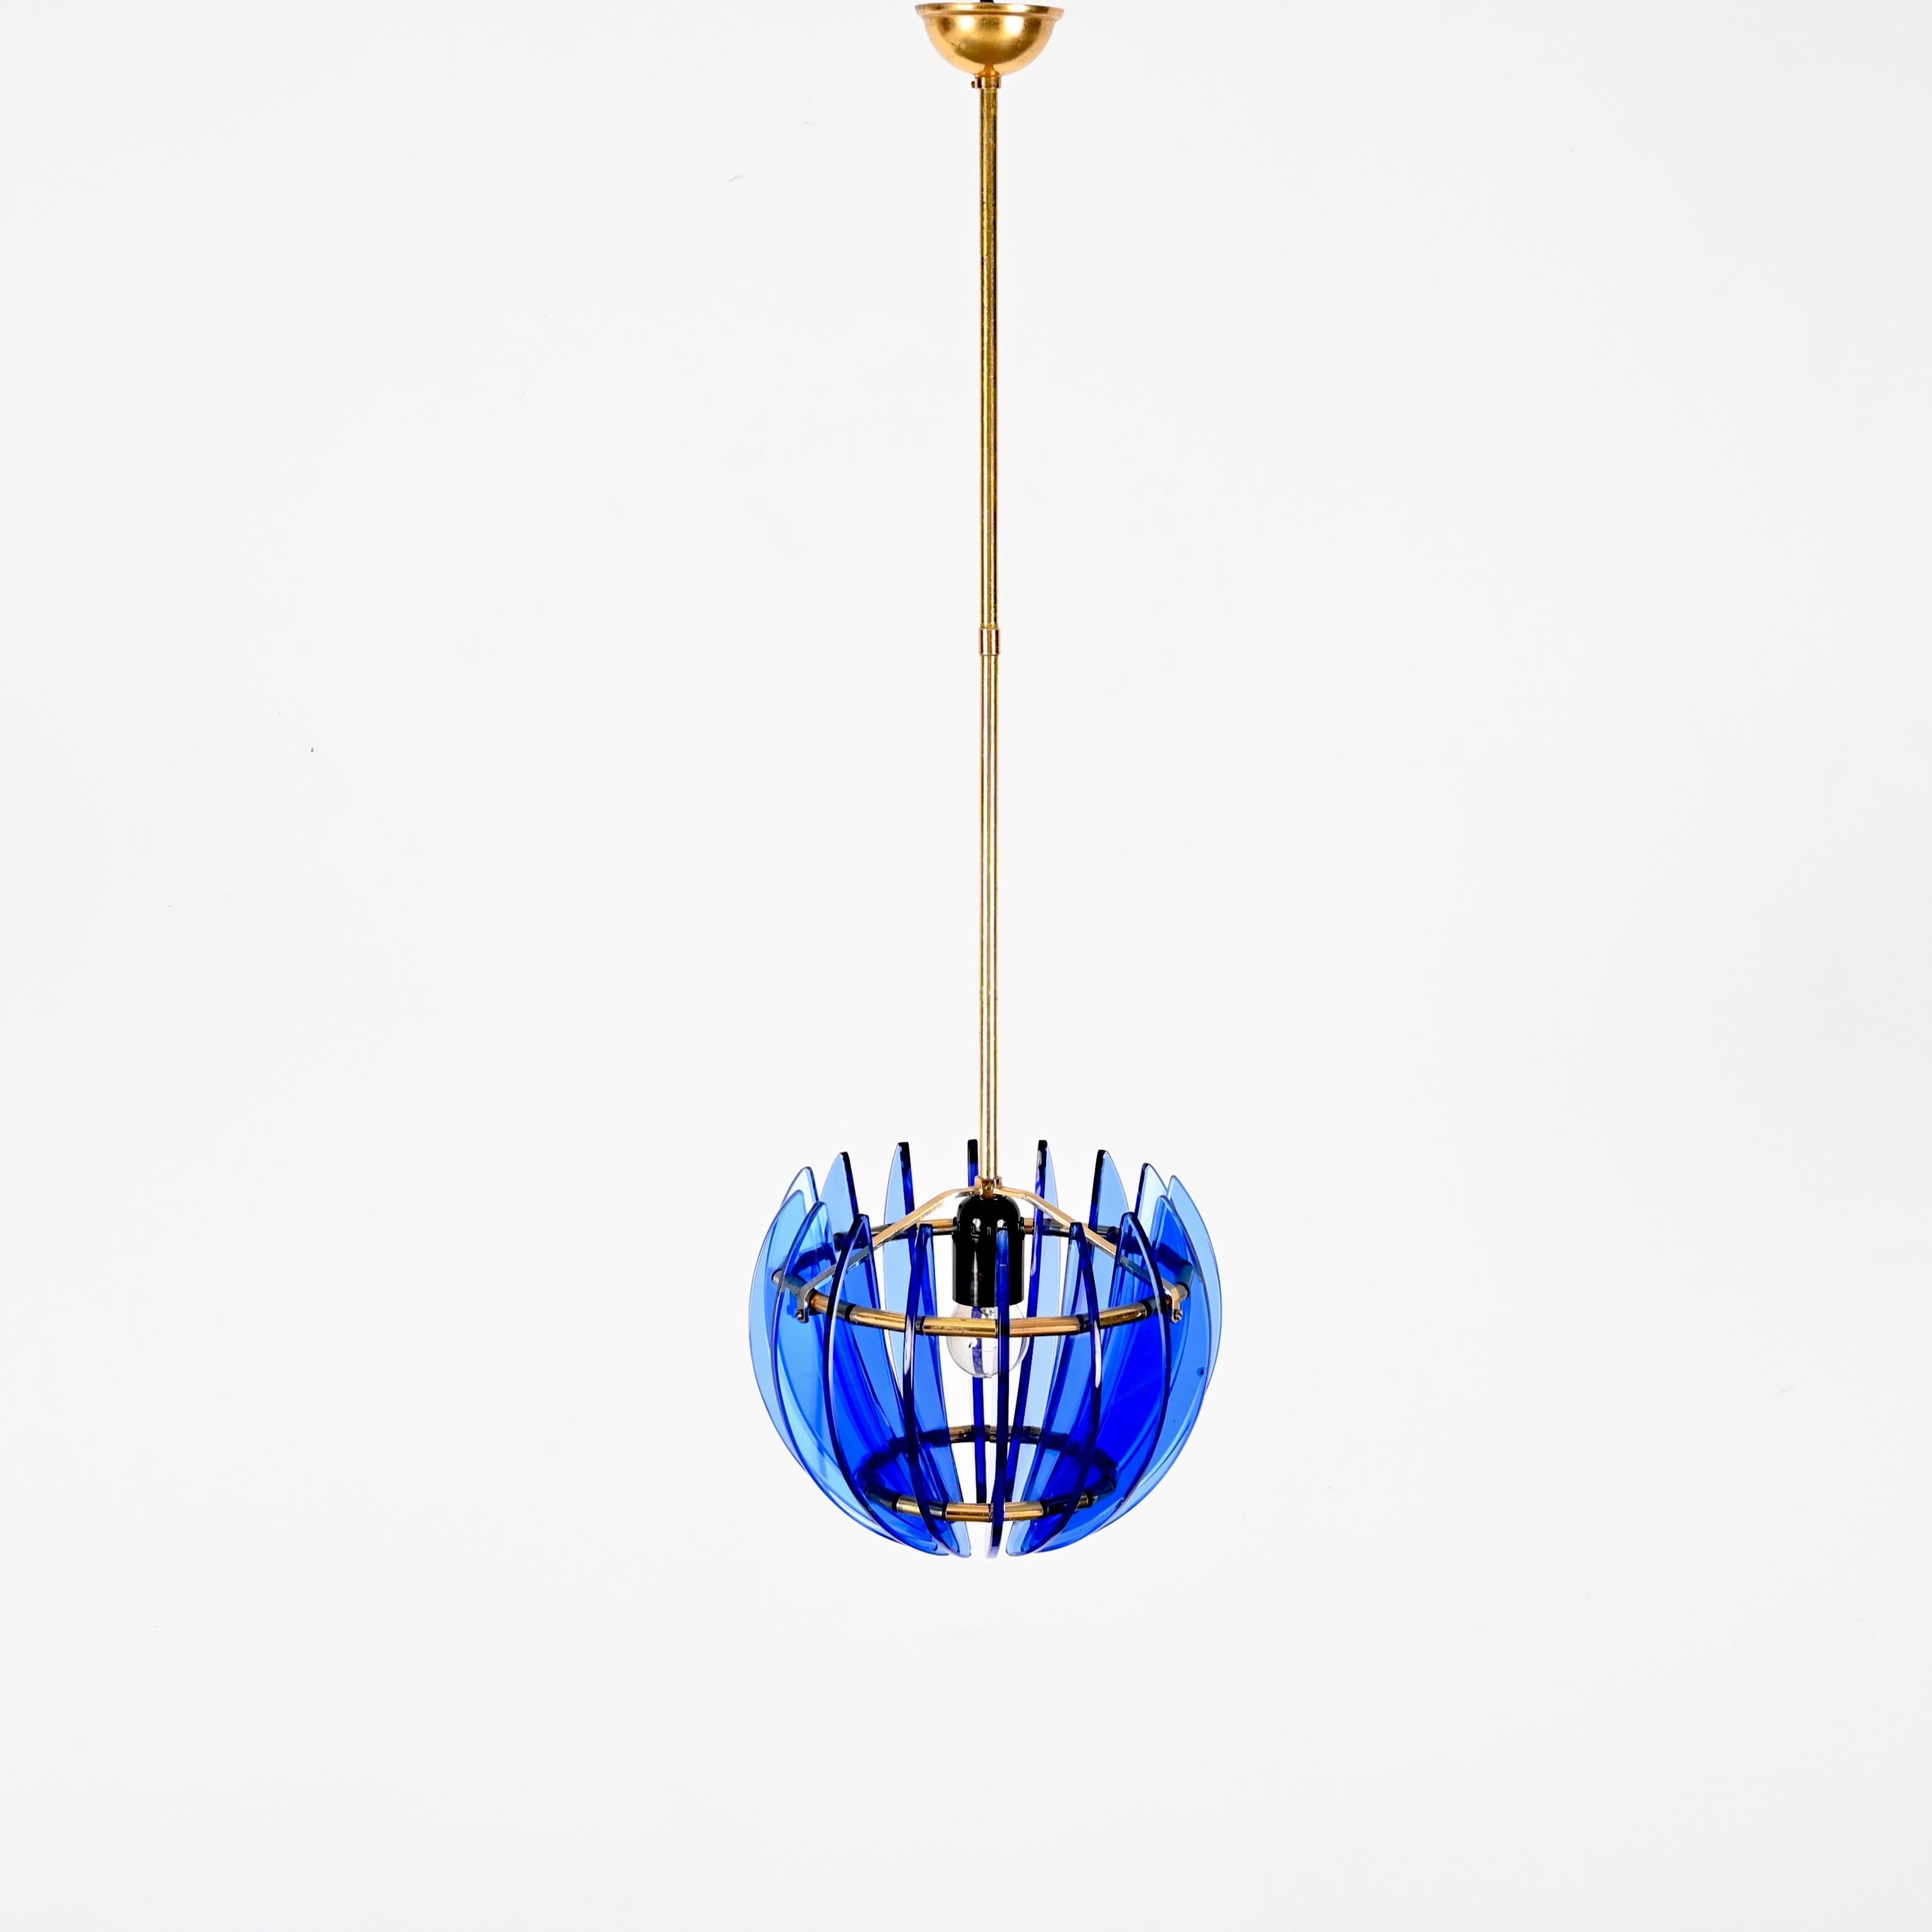 Italian Mid-Century Blue Glass and Brass Pendant by Galvorame, Italy 1960s For Sale 3